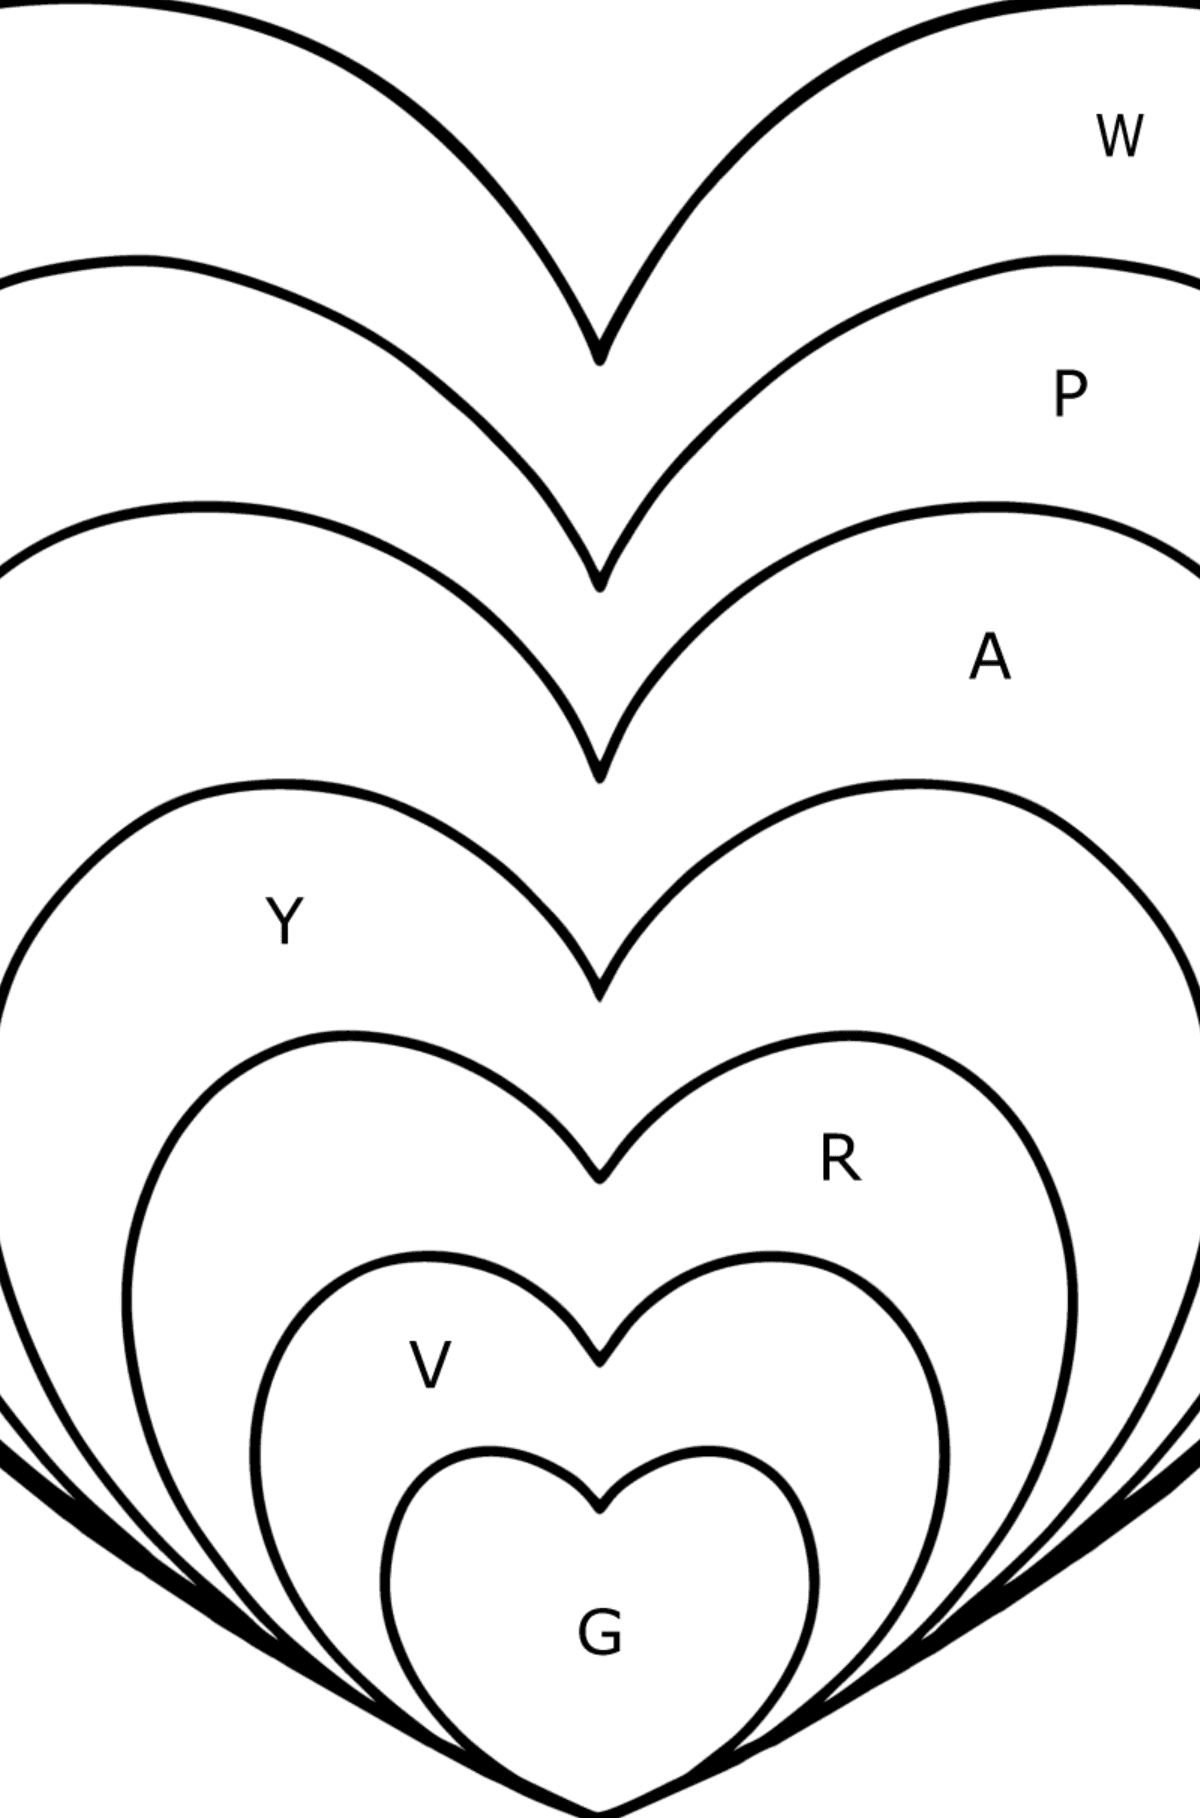 Simple Zen heart coloring page - Coloring by Letters for Kids